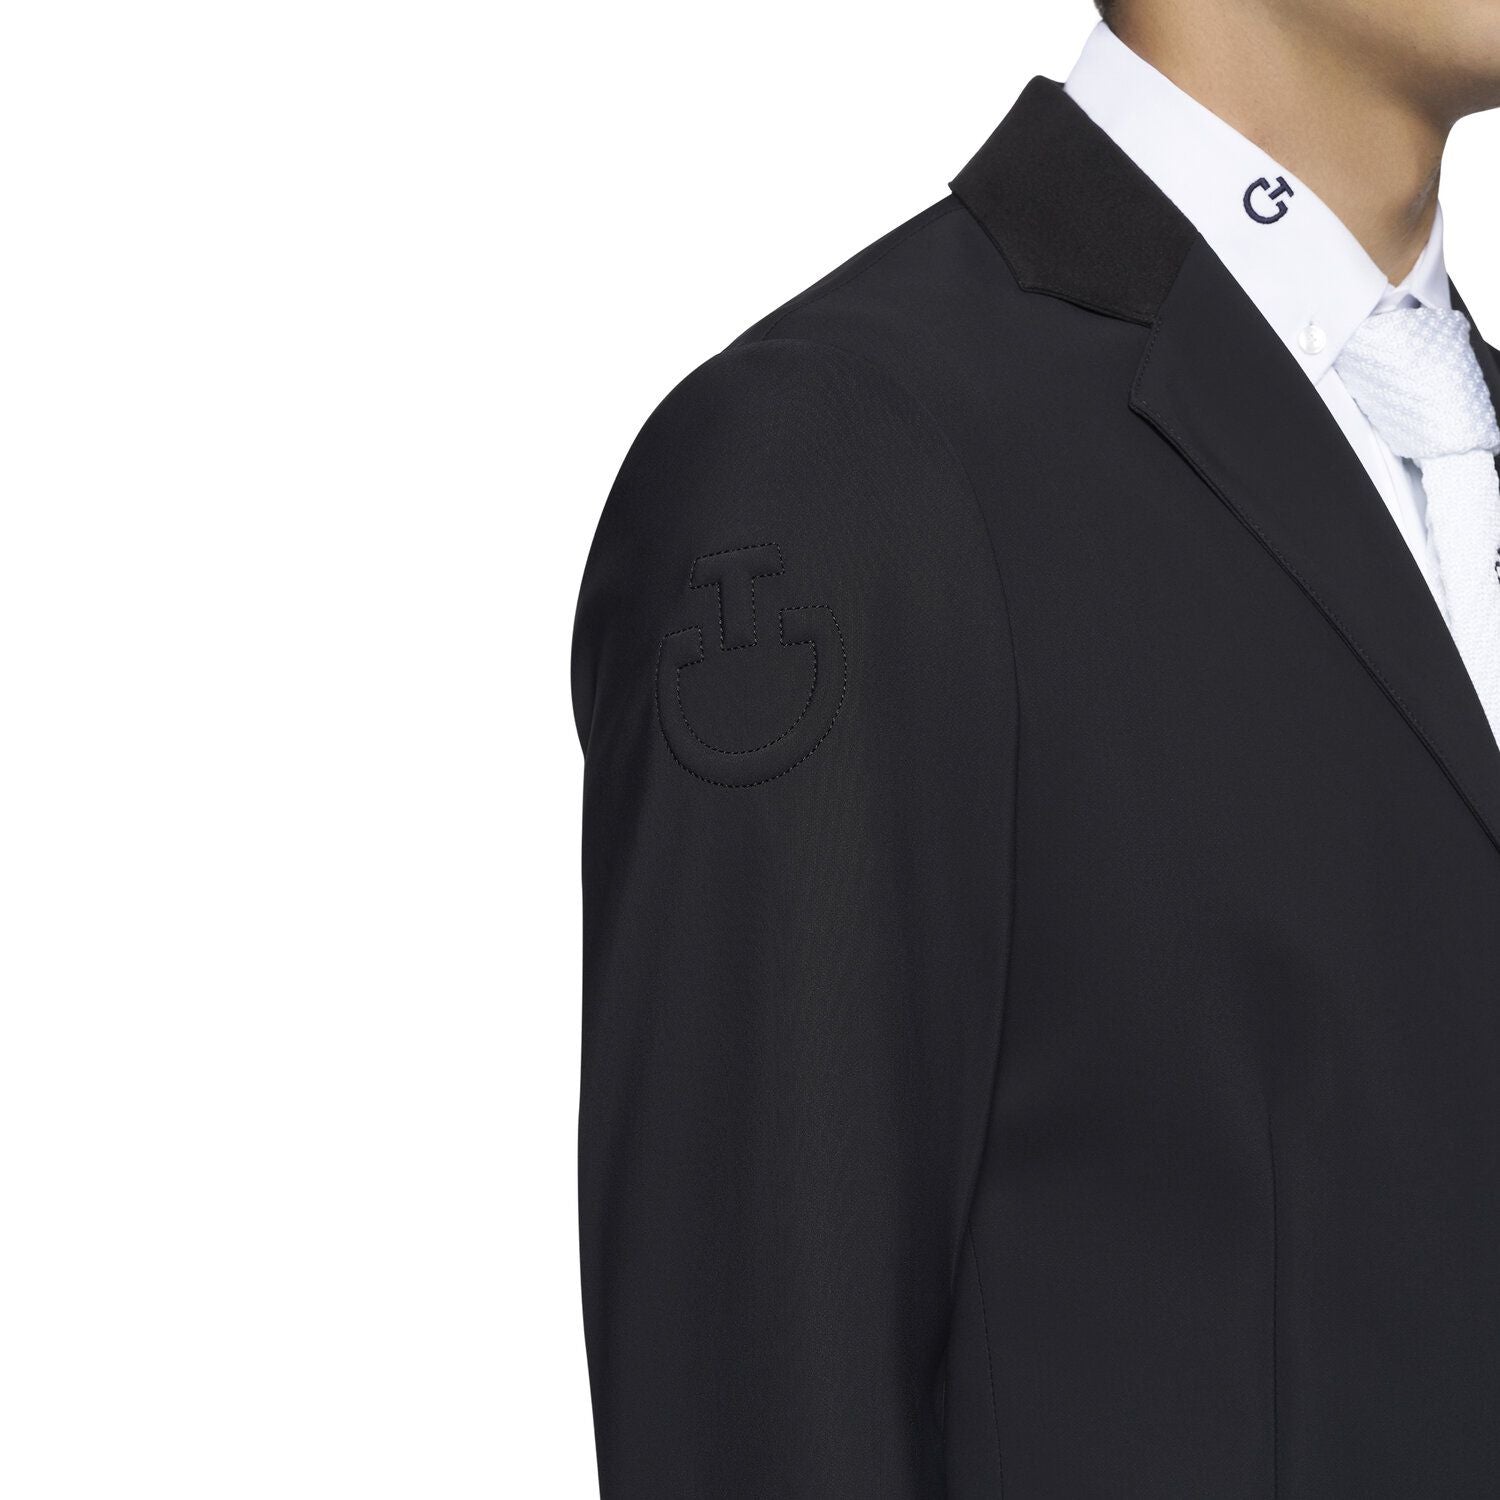 product shot image of the Mens Lightweight Jersey Zip Riding Jacket - Black